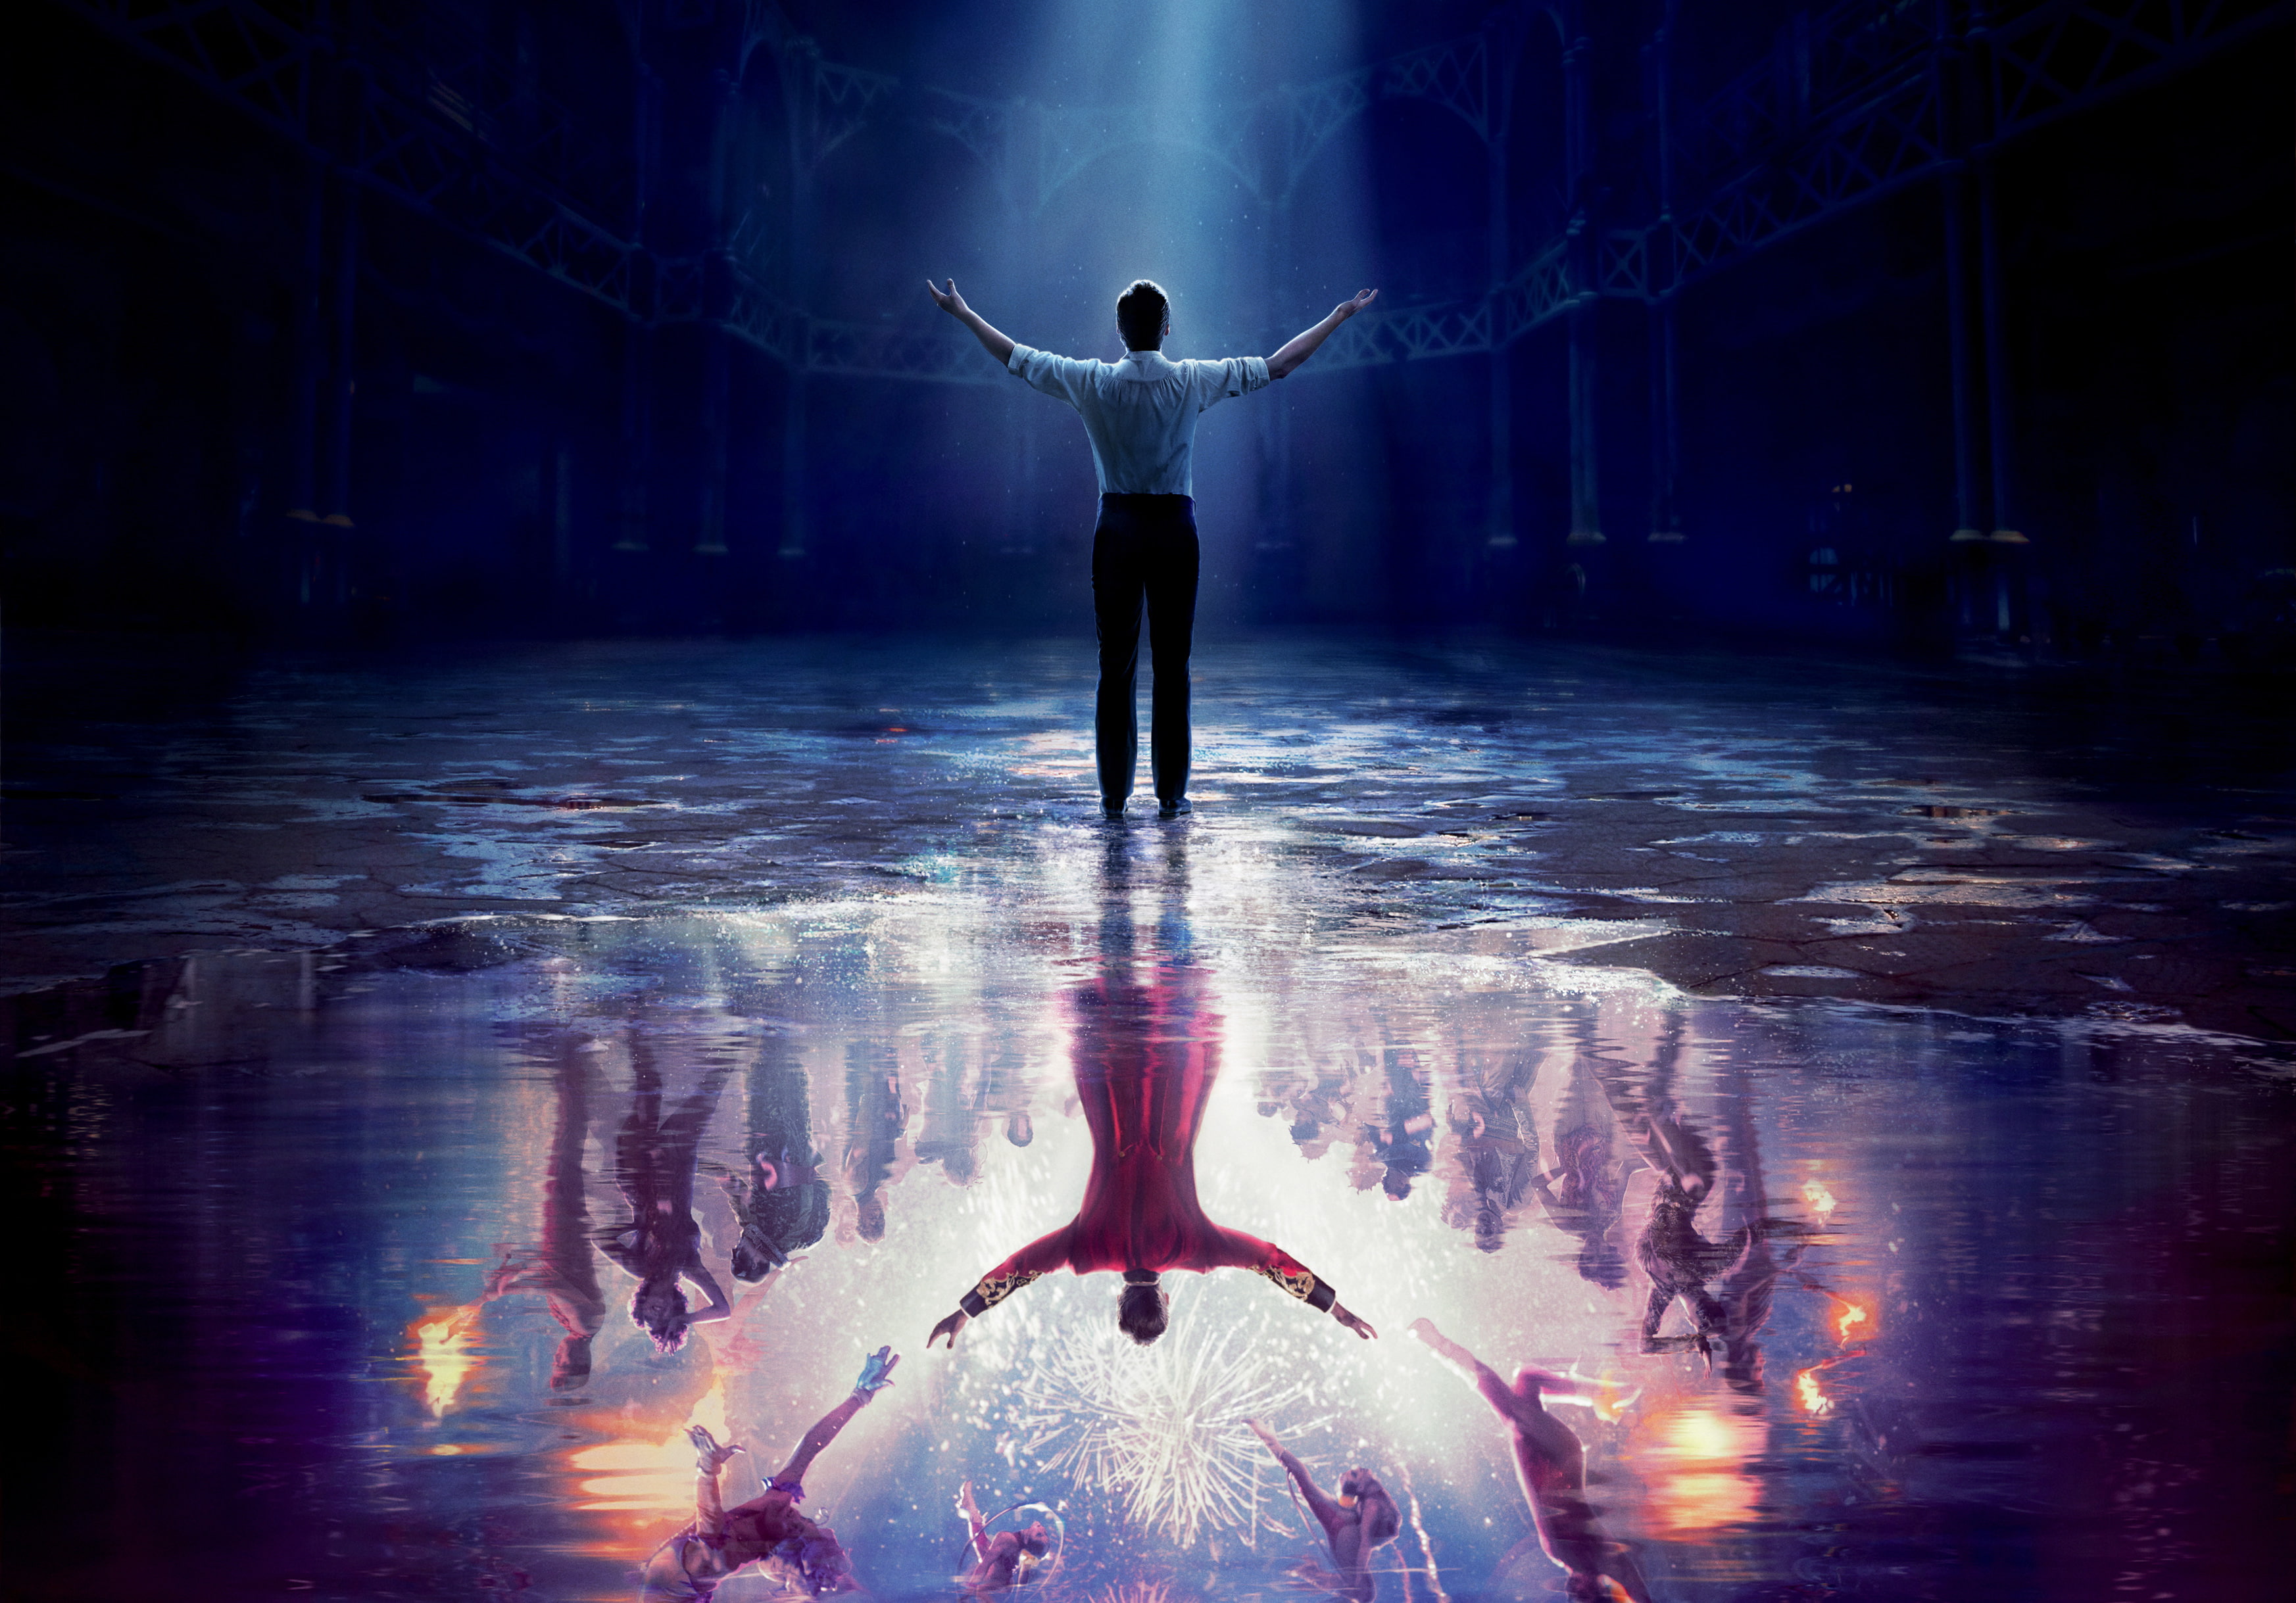 the greatest showman, 2017 movies, hd, 4k, one person, full length